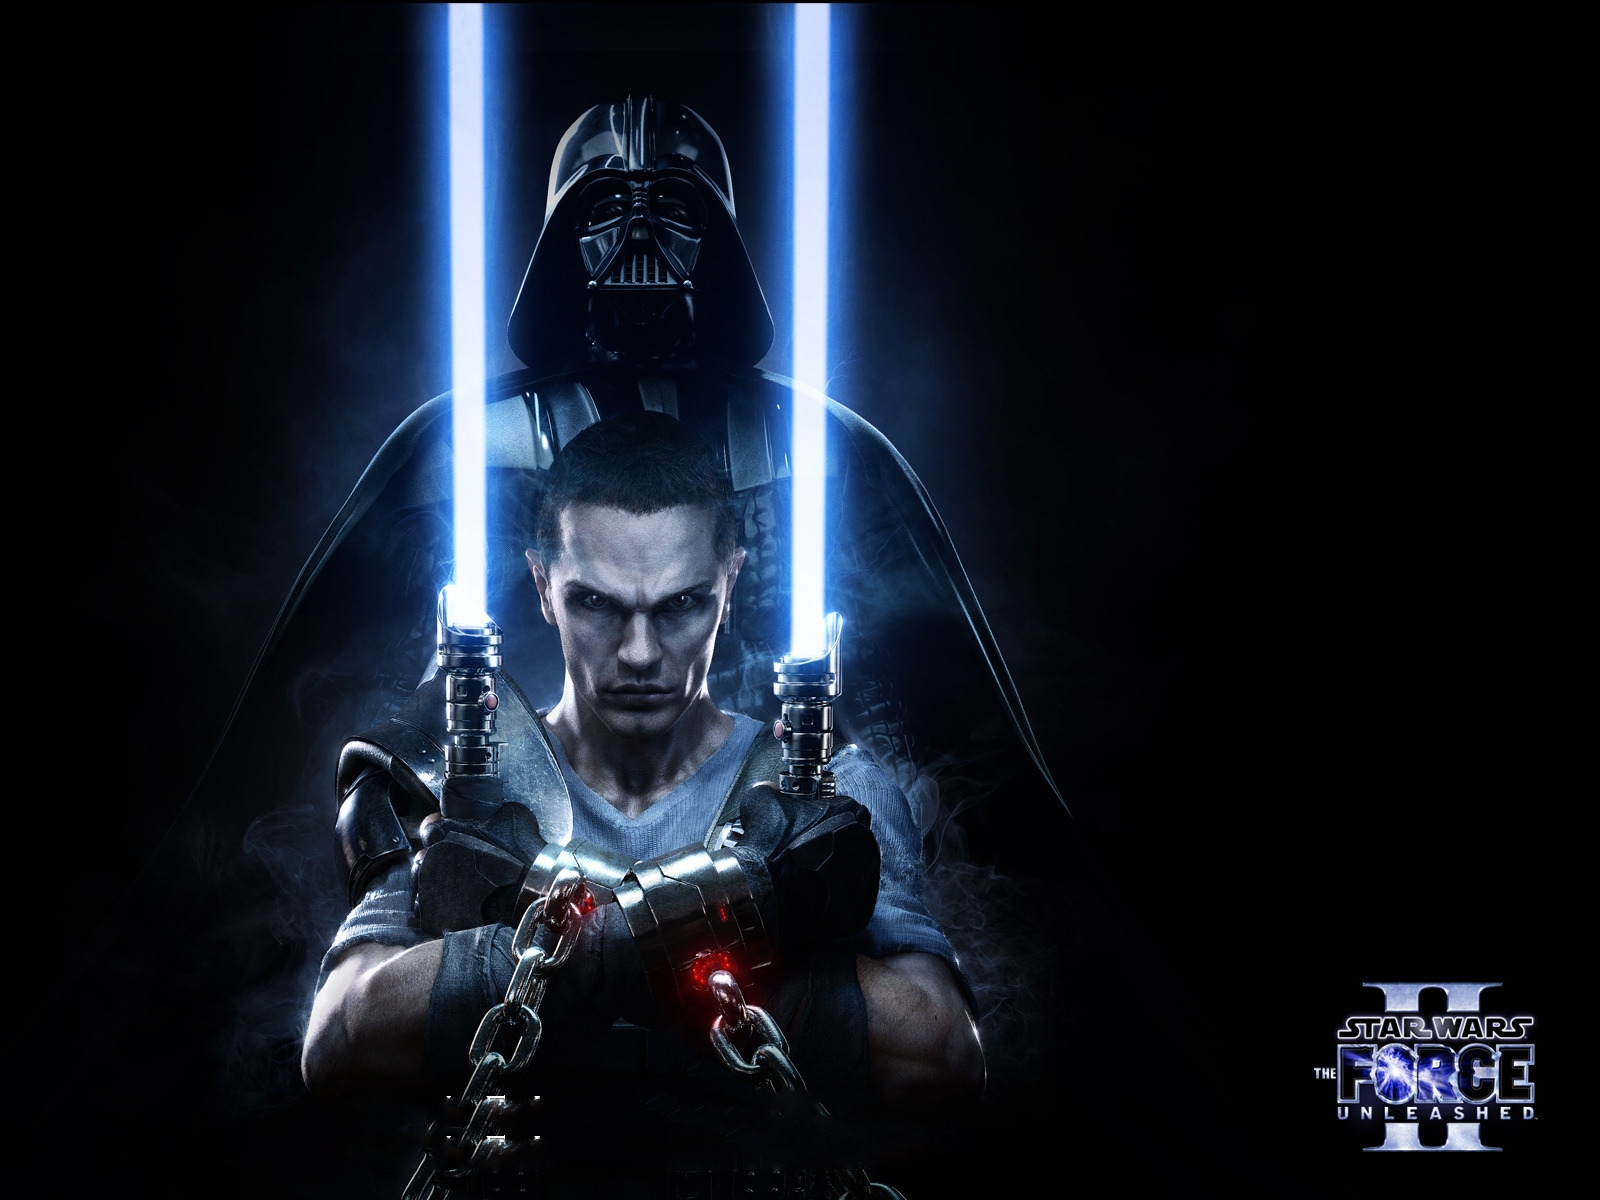 Star Wars The force Unleashed 2 Poster for 1600 x 1200 resolution